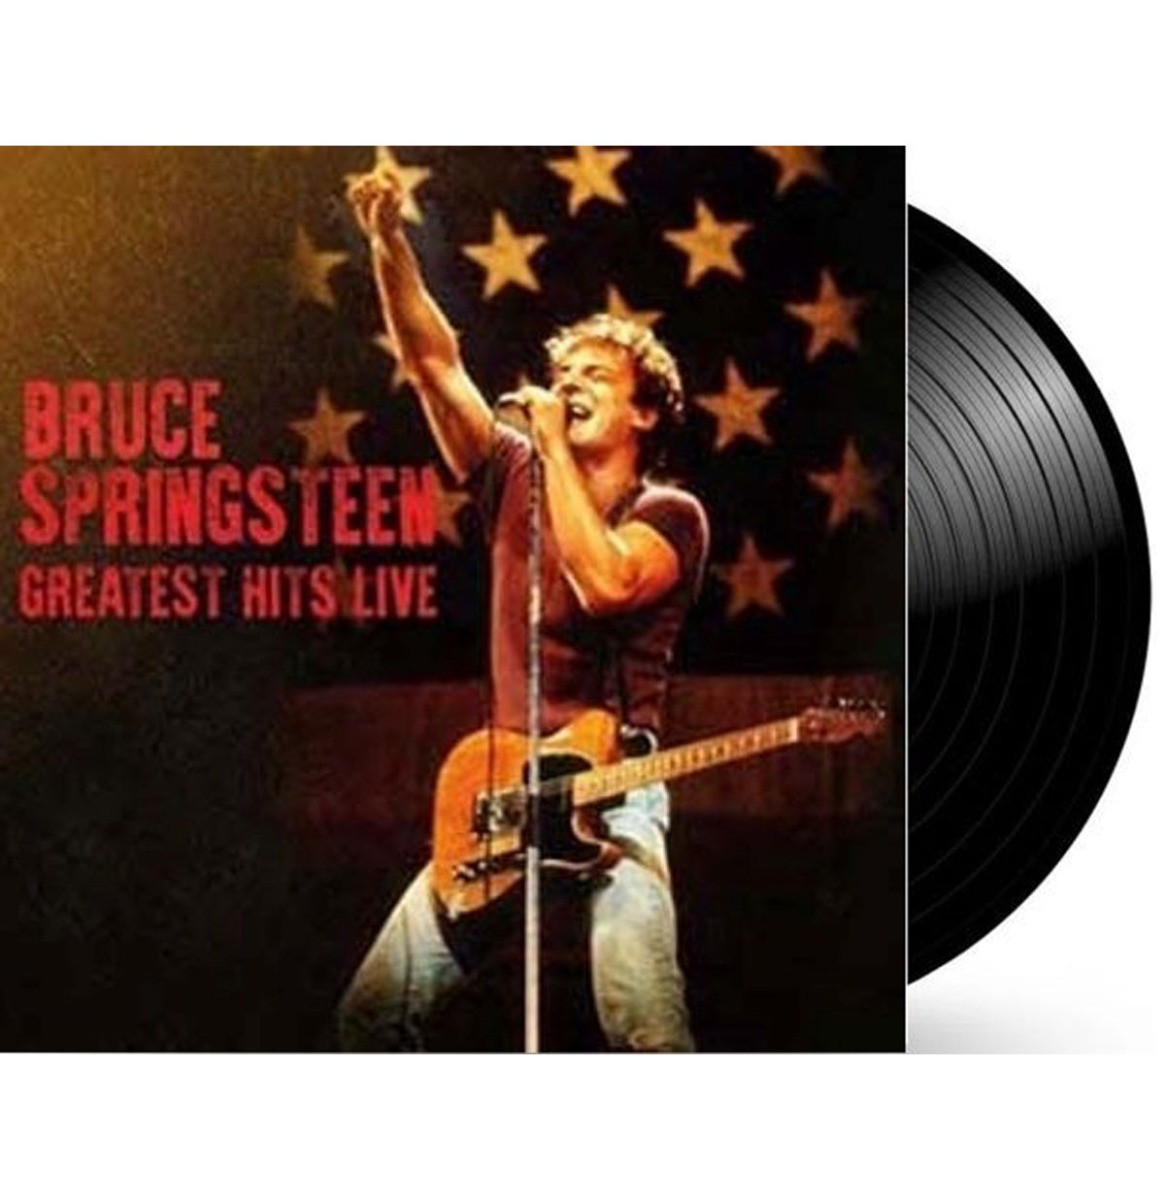 Bruce Springsteen - Greatest Hits Live LP